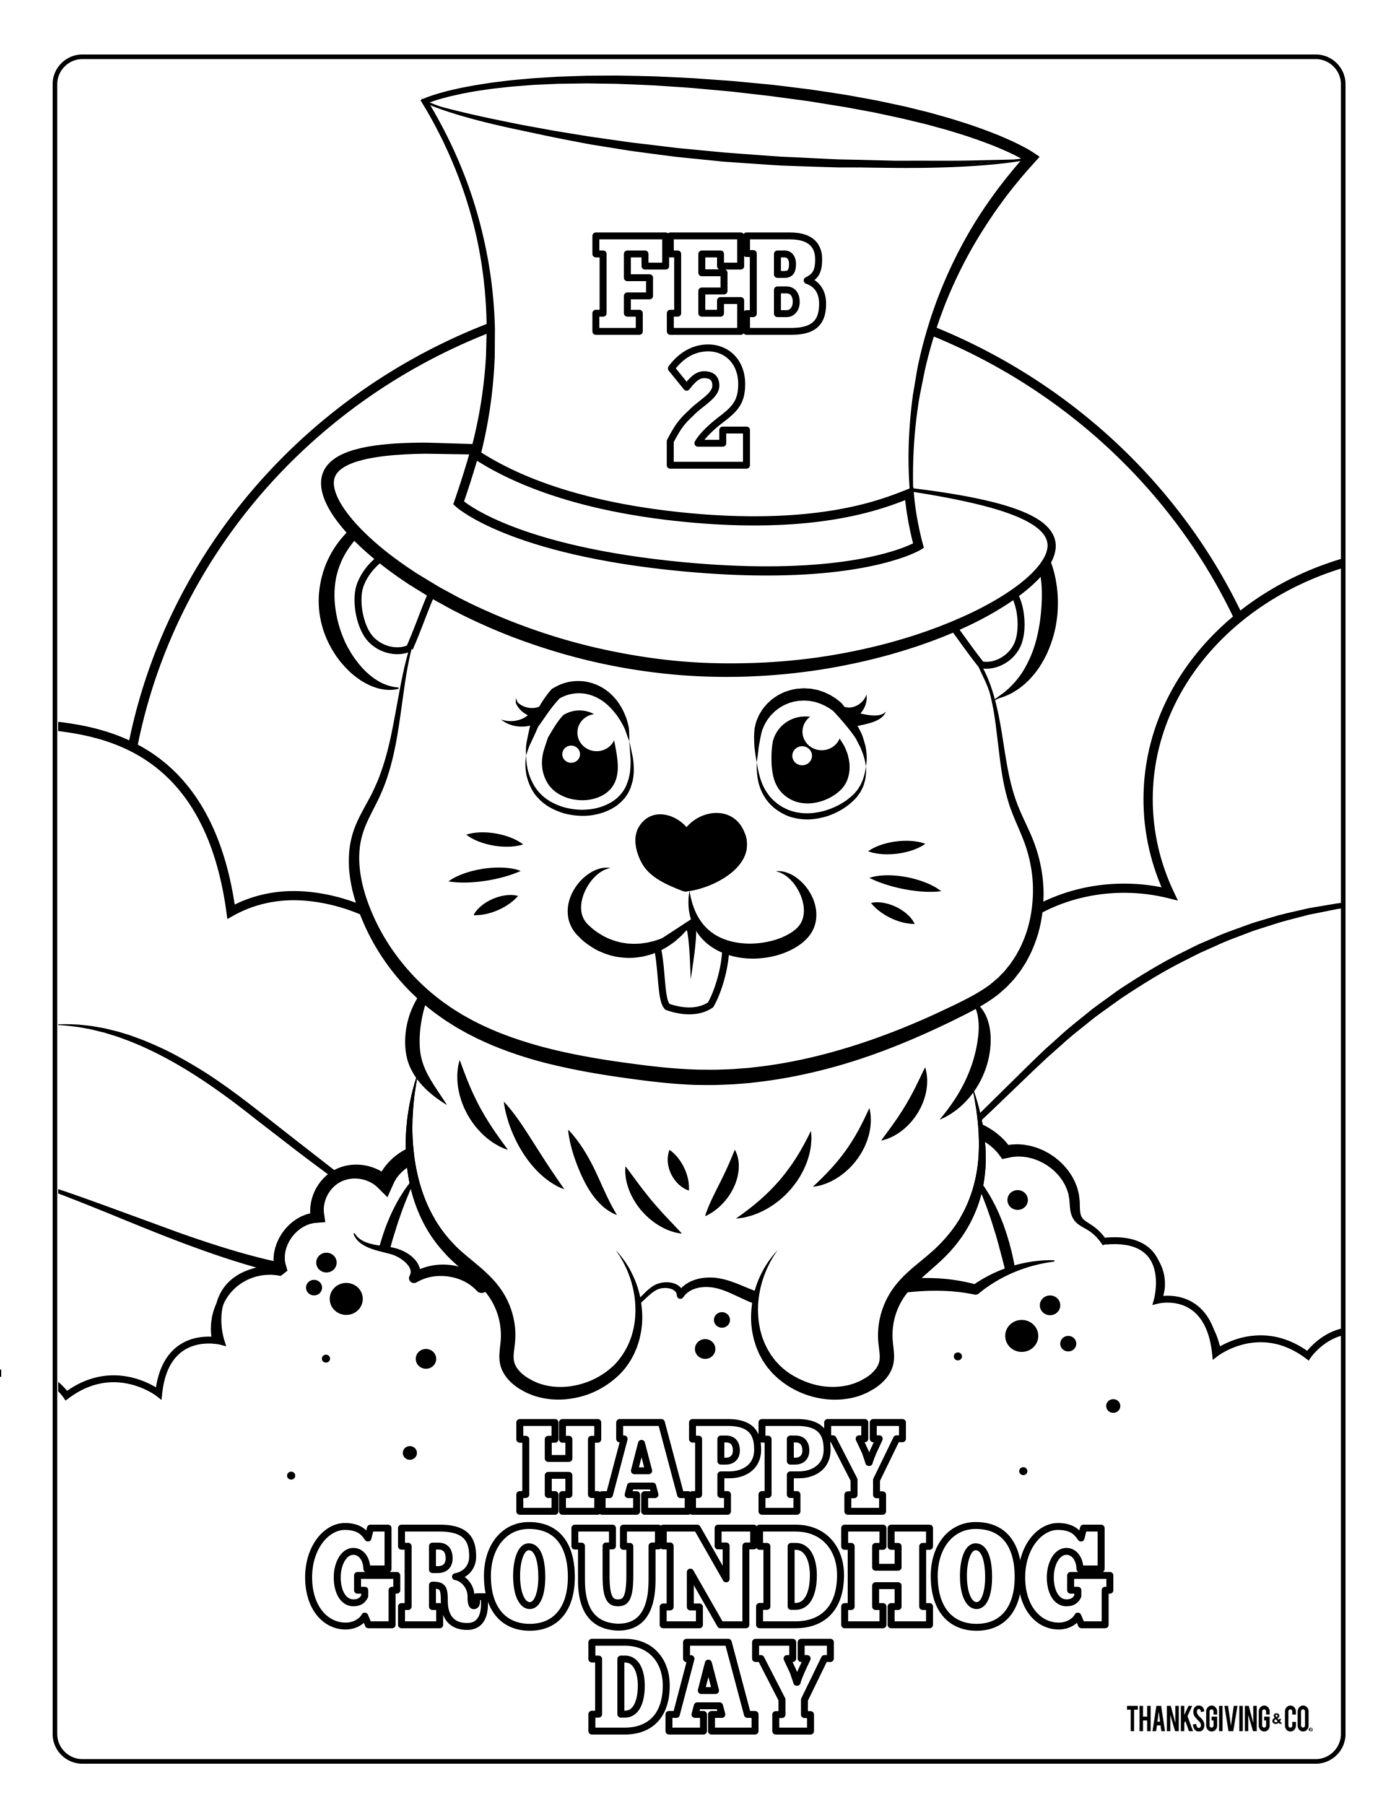 4 Adorable Groundhog Day Coloring Pages For Kids